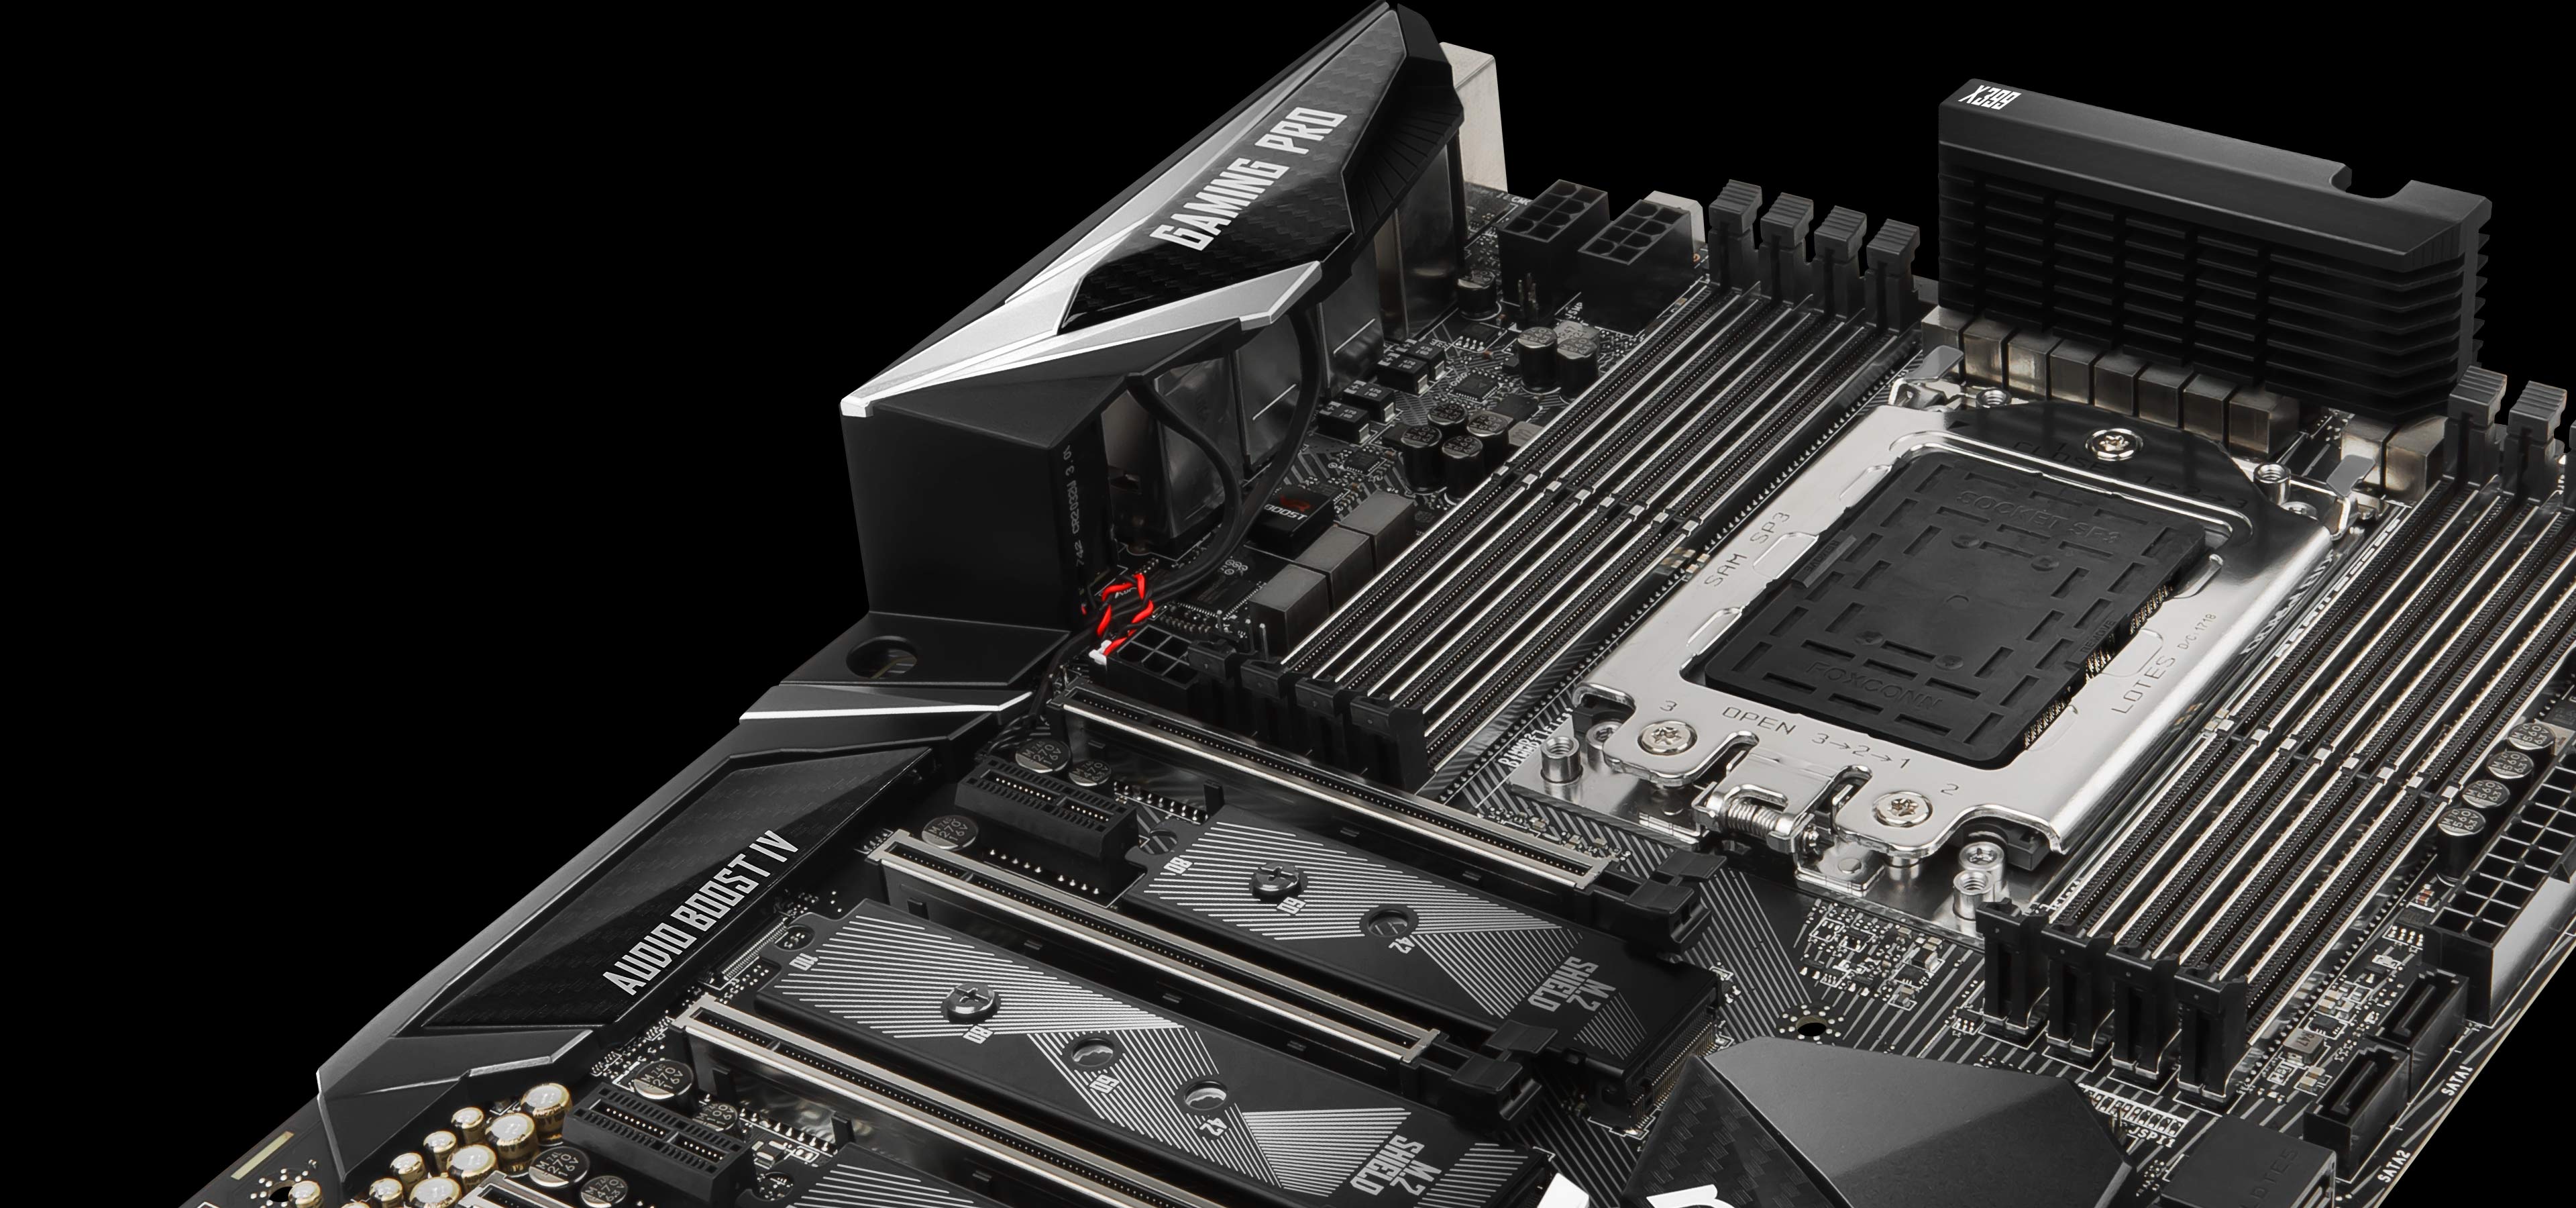 MSI X399 GAMING PRO CARBON AC MOTHERBOARD